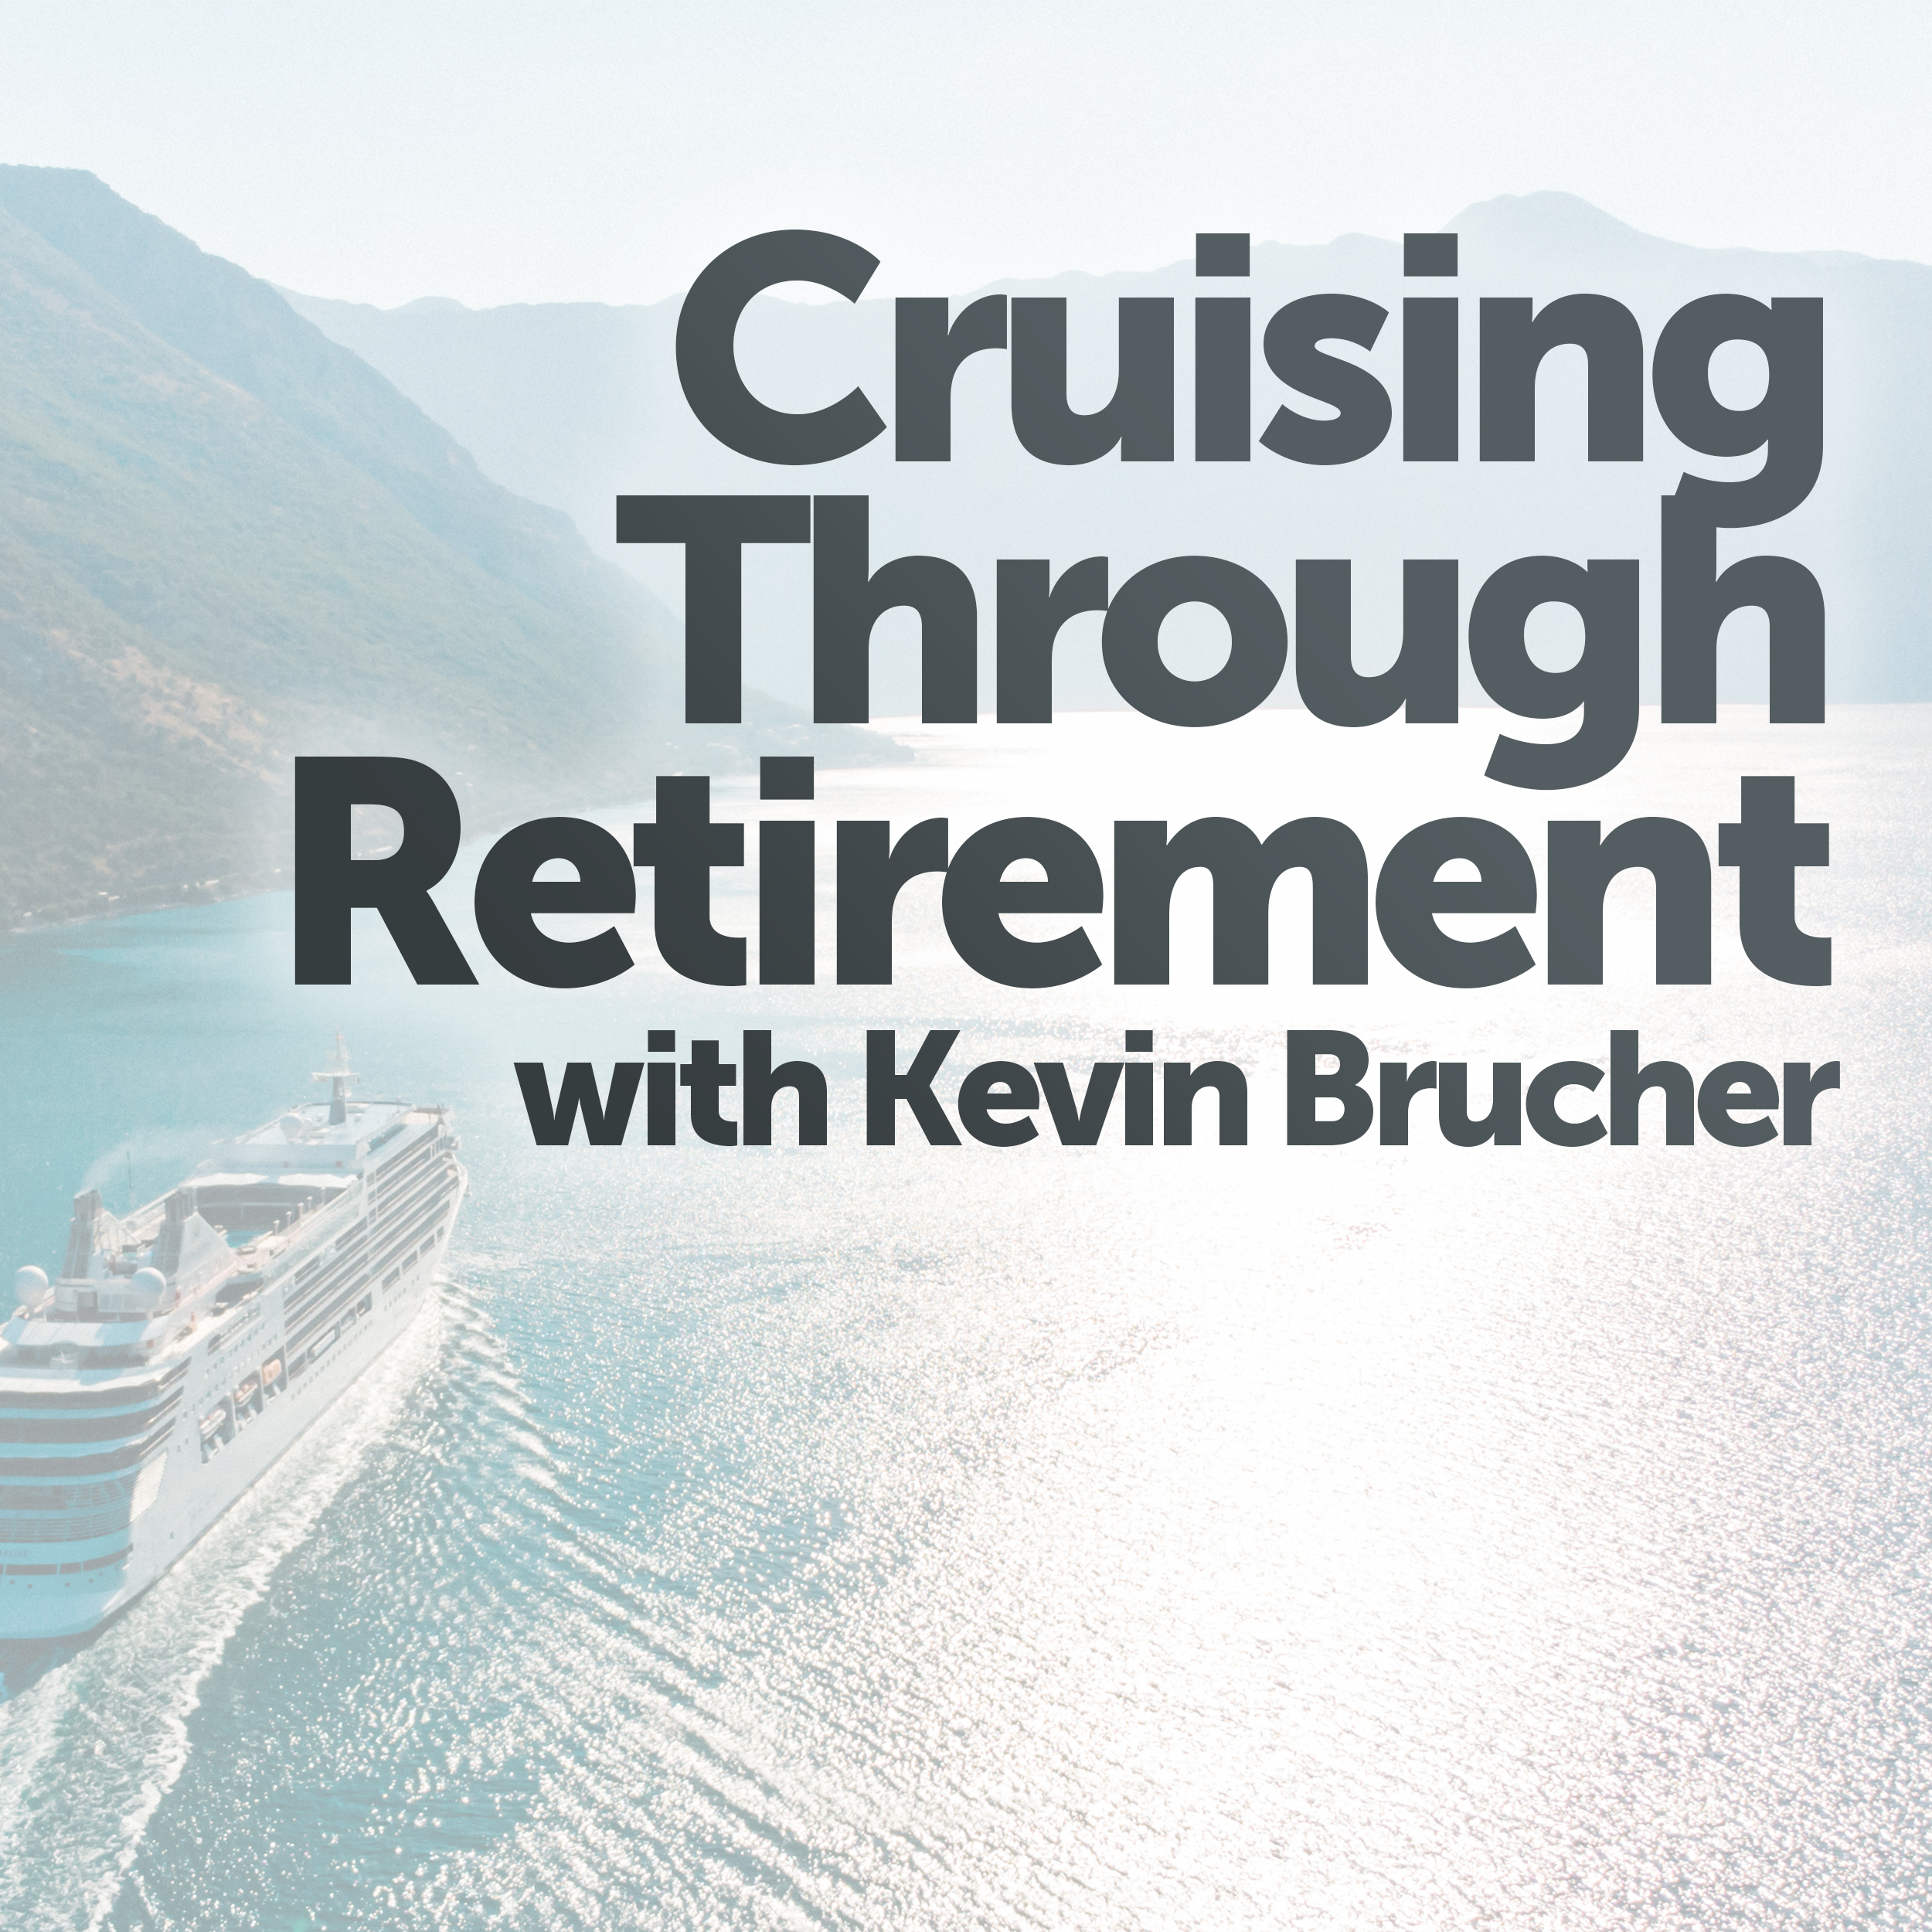 Cruising Through Retirement Kevin Brucher breaks down the differences in a variety of annuities. Some better than others but still can make a positive difference in getting you through retirement.